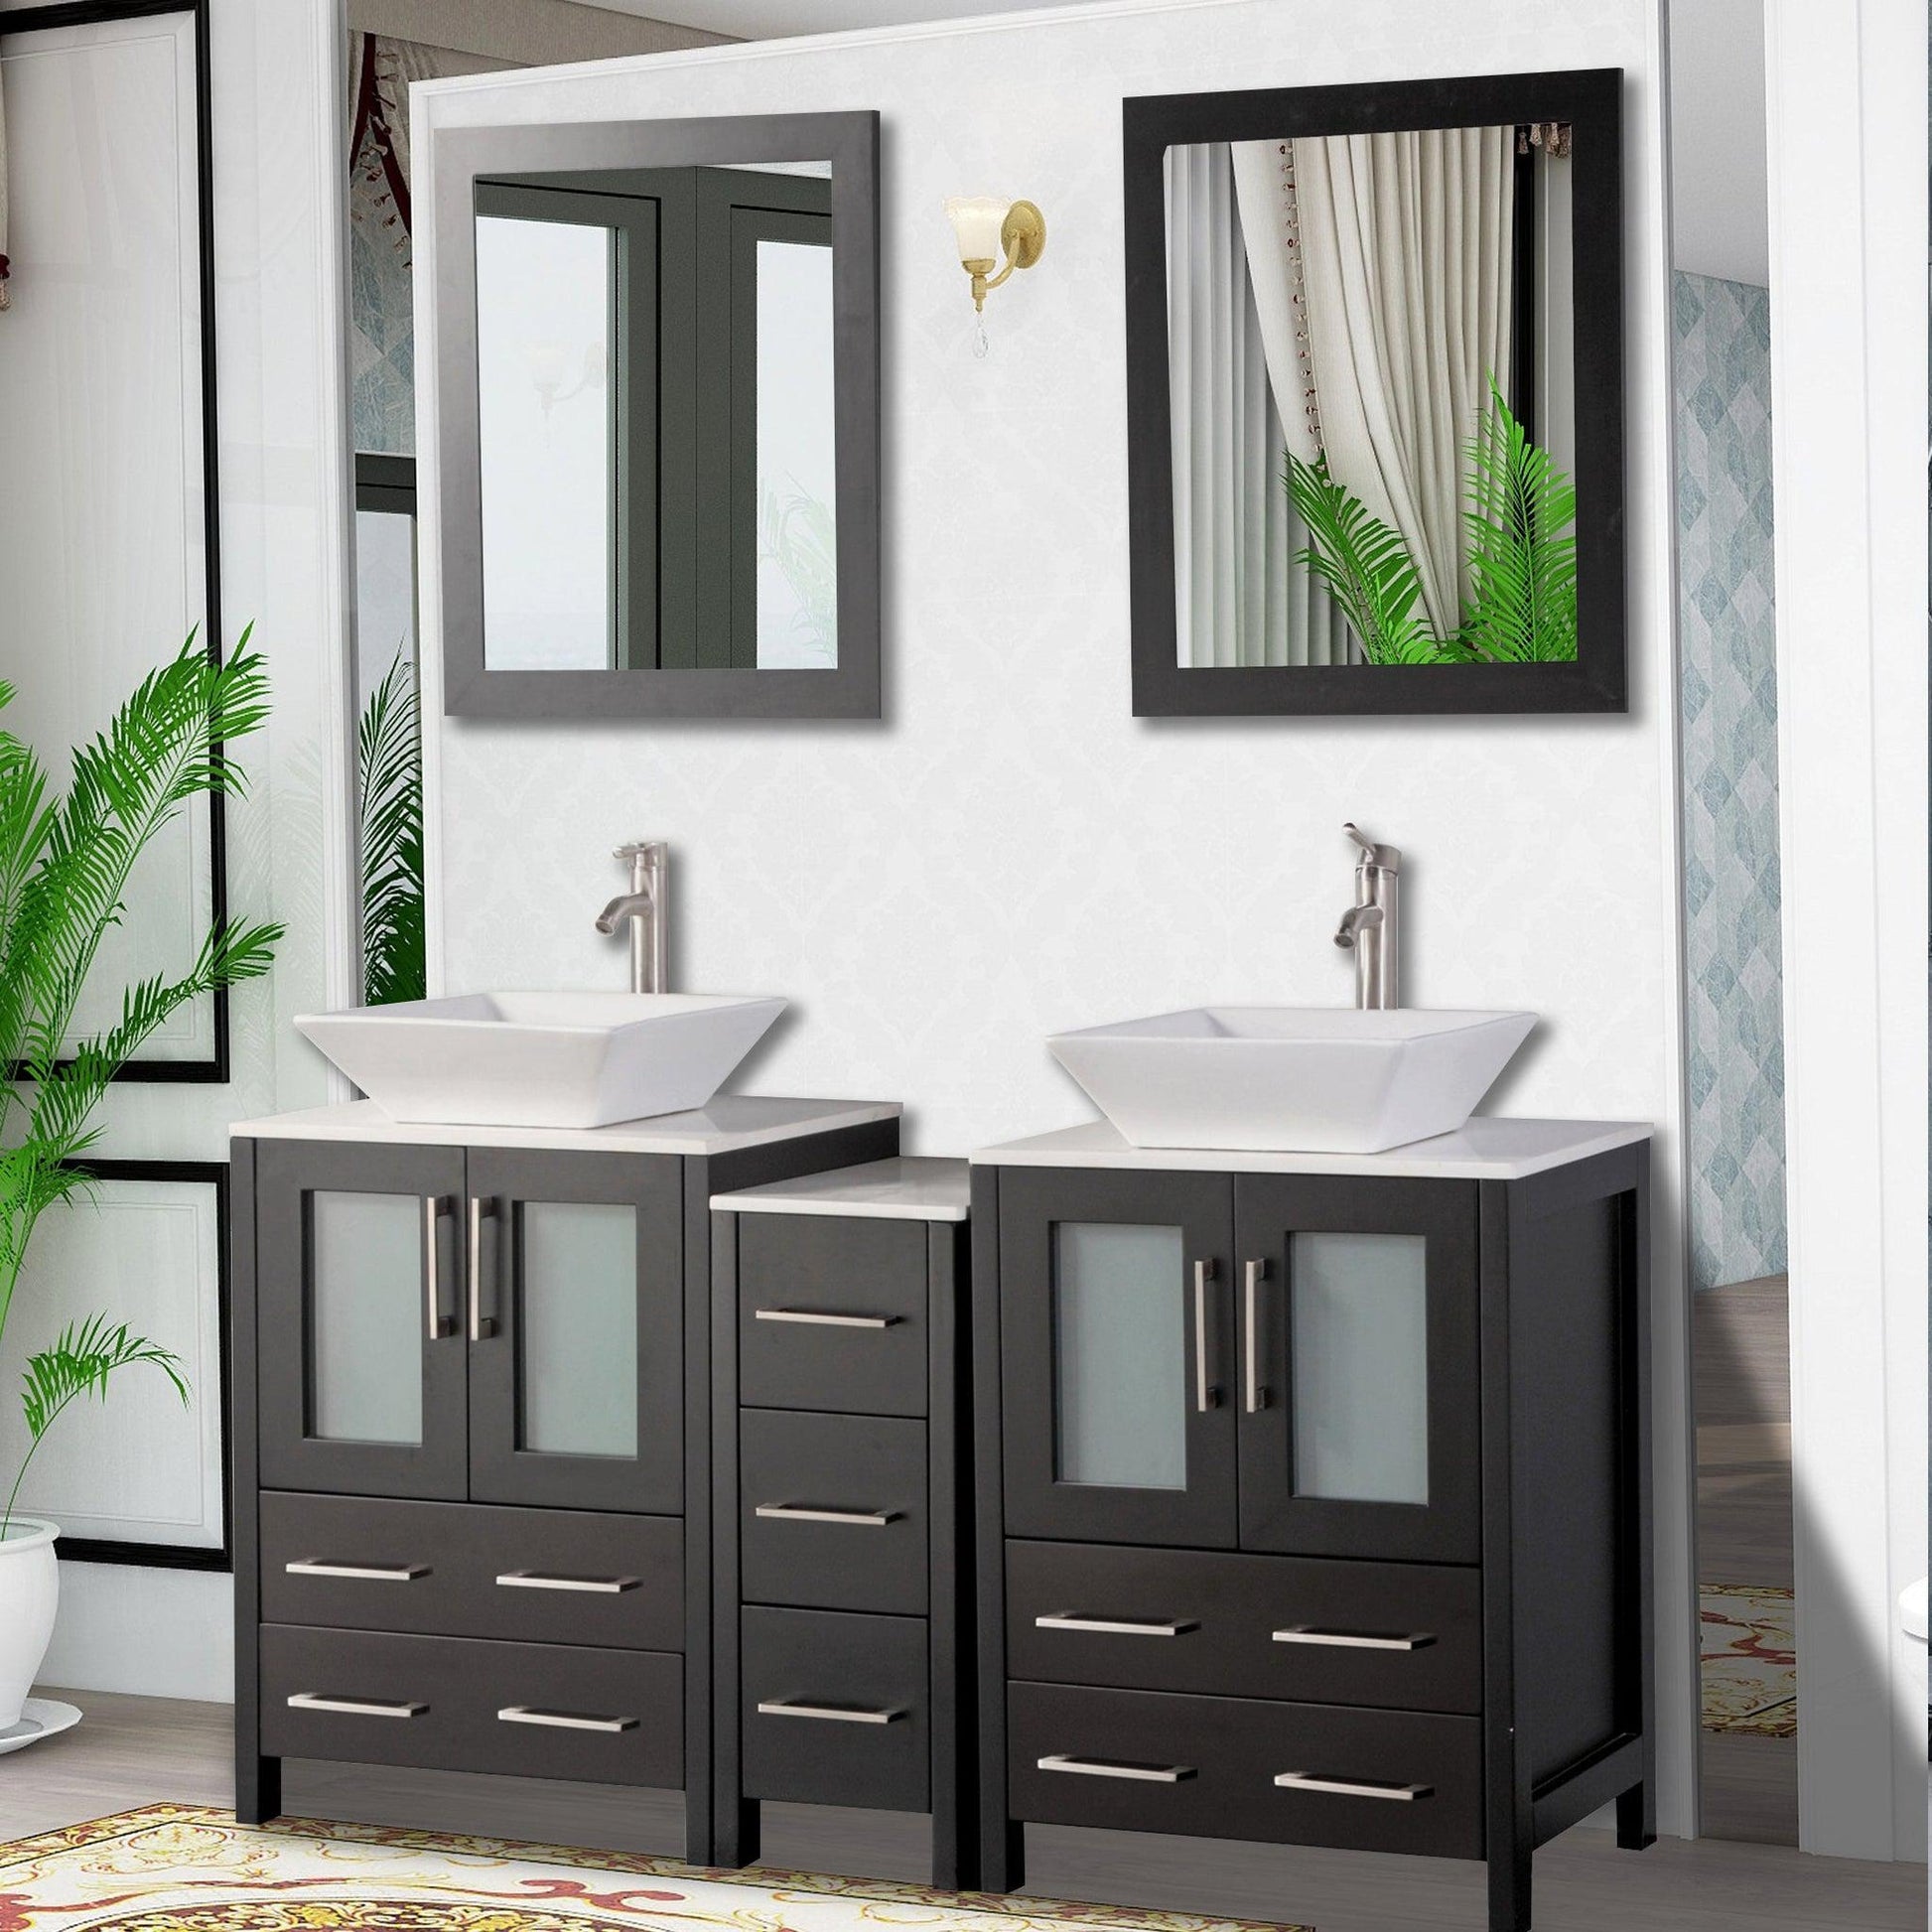 Vanity Art Ravenna 60" Double Espresso Freestanding Vanity Set With White Engineered Marble Top, 2 Ceramic Vessel Sinks, 1 Side Cabinet and 2 Mirrors